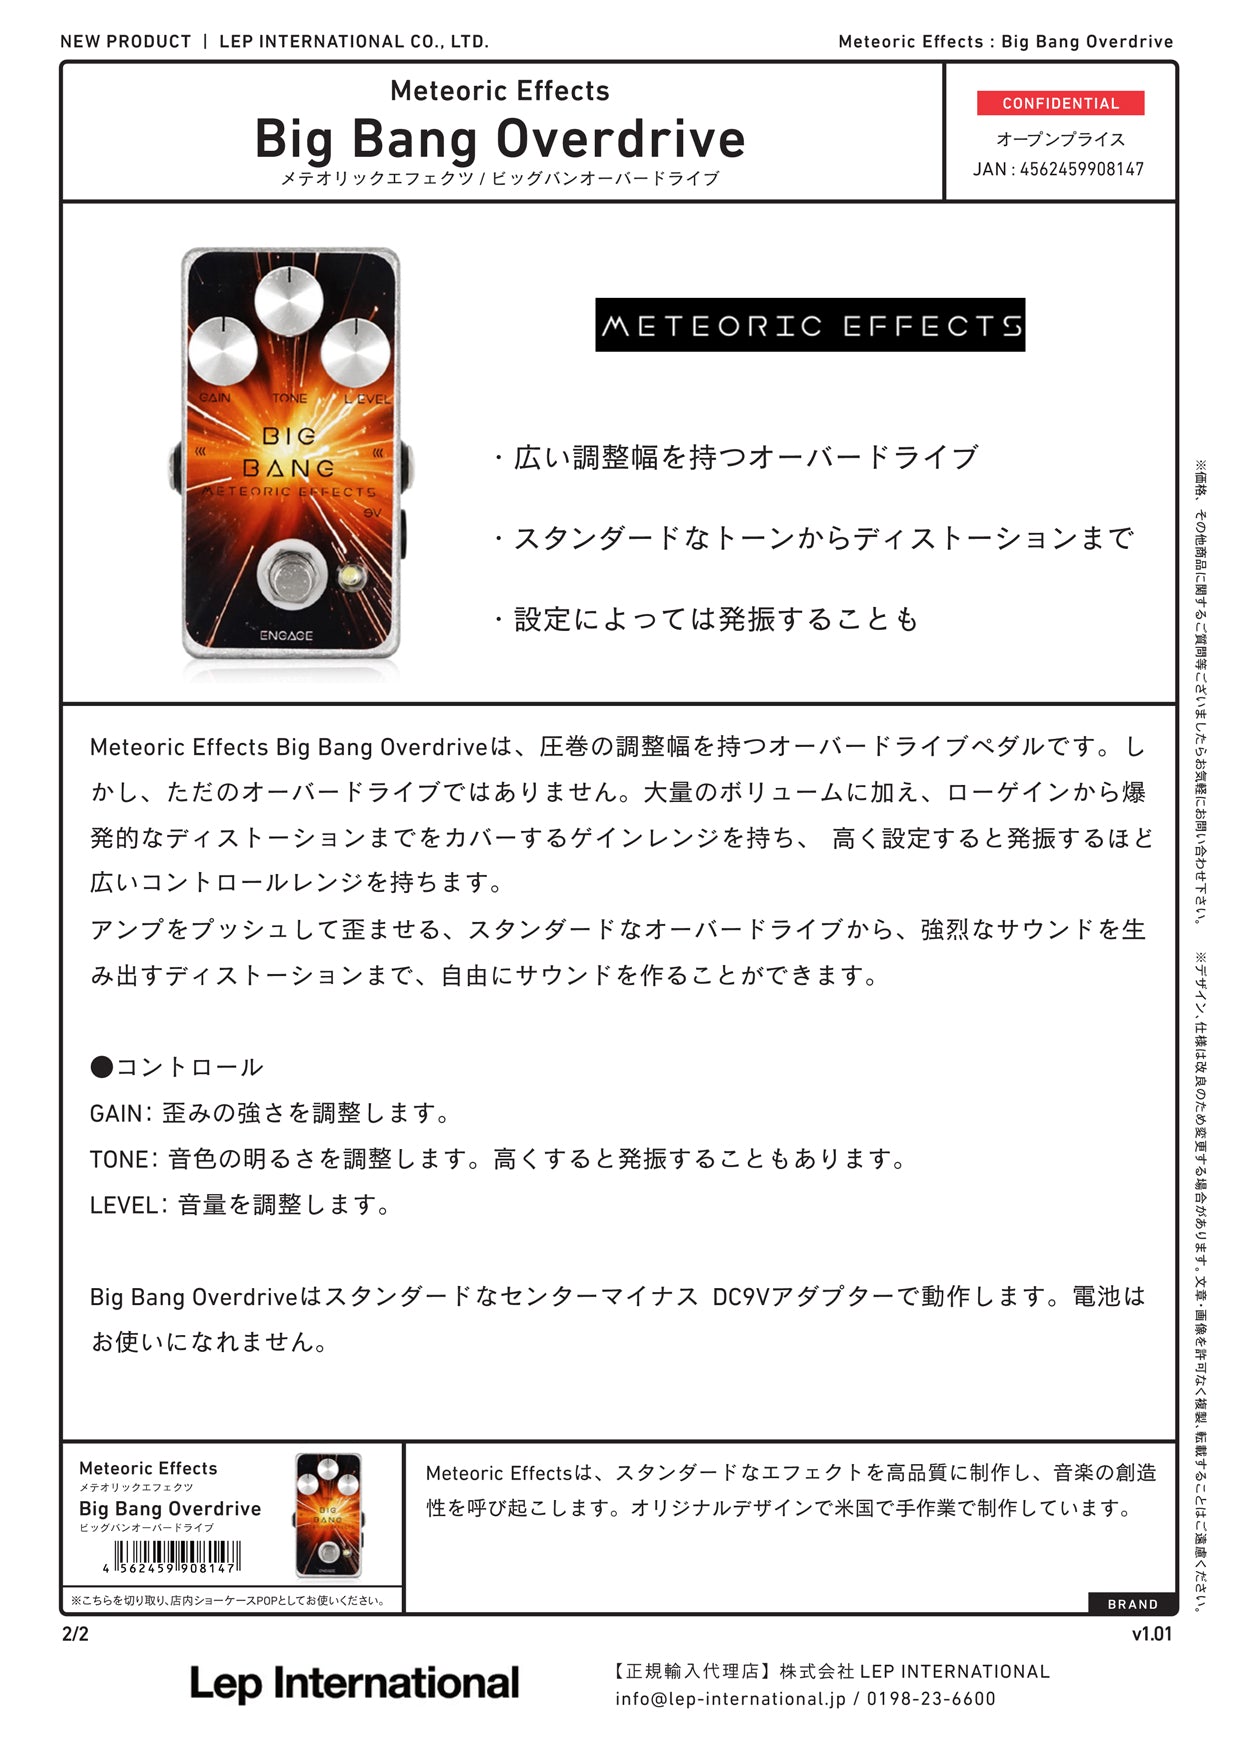 Meteoric Effects / Big Bang Overdrive